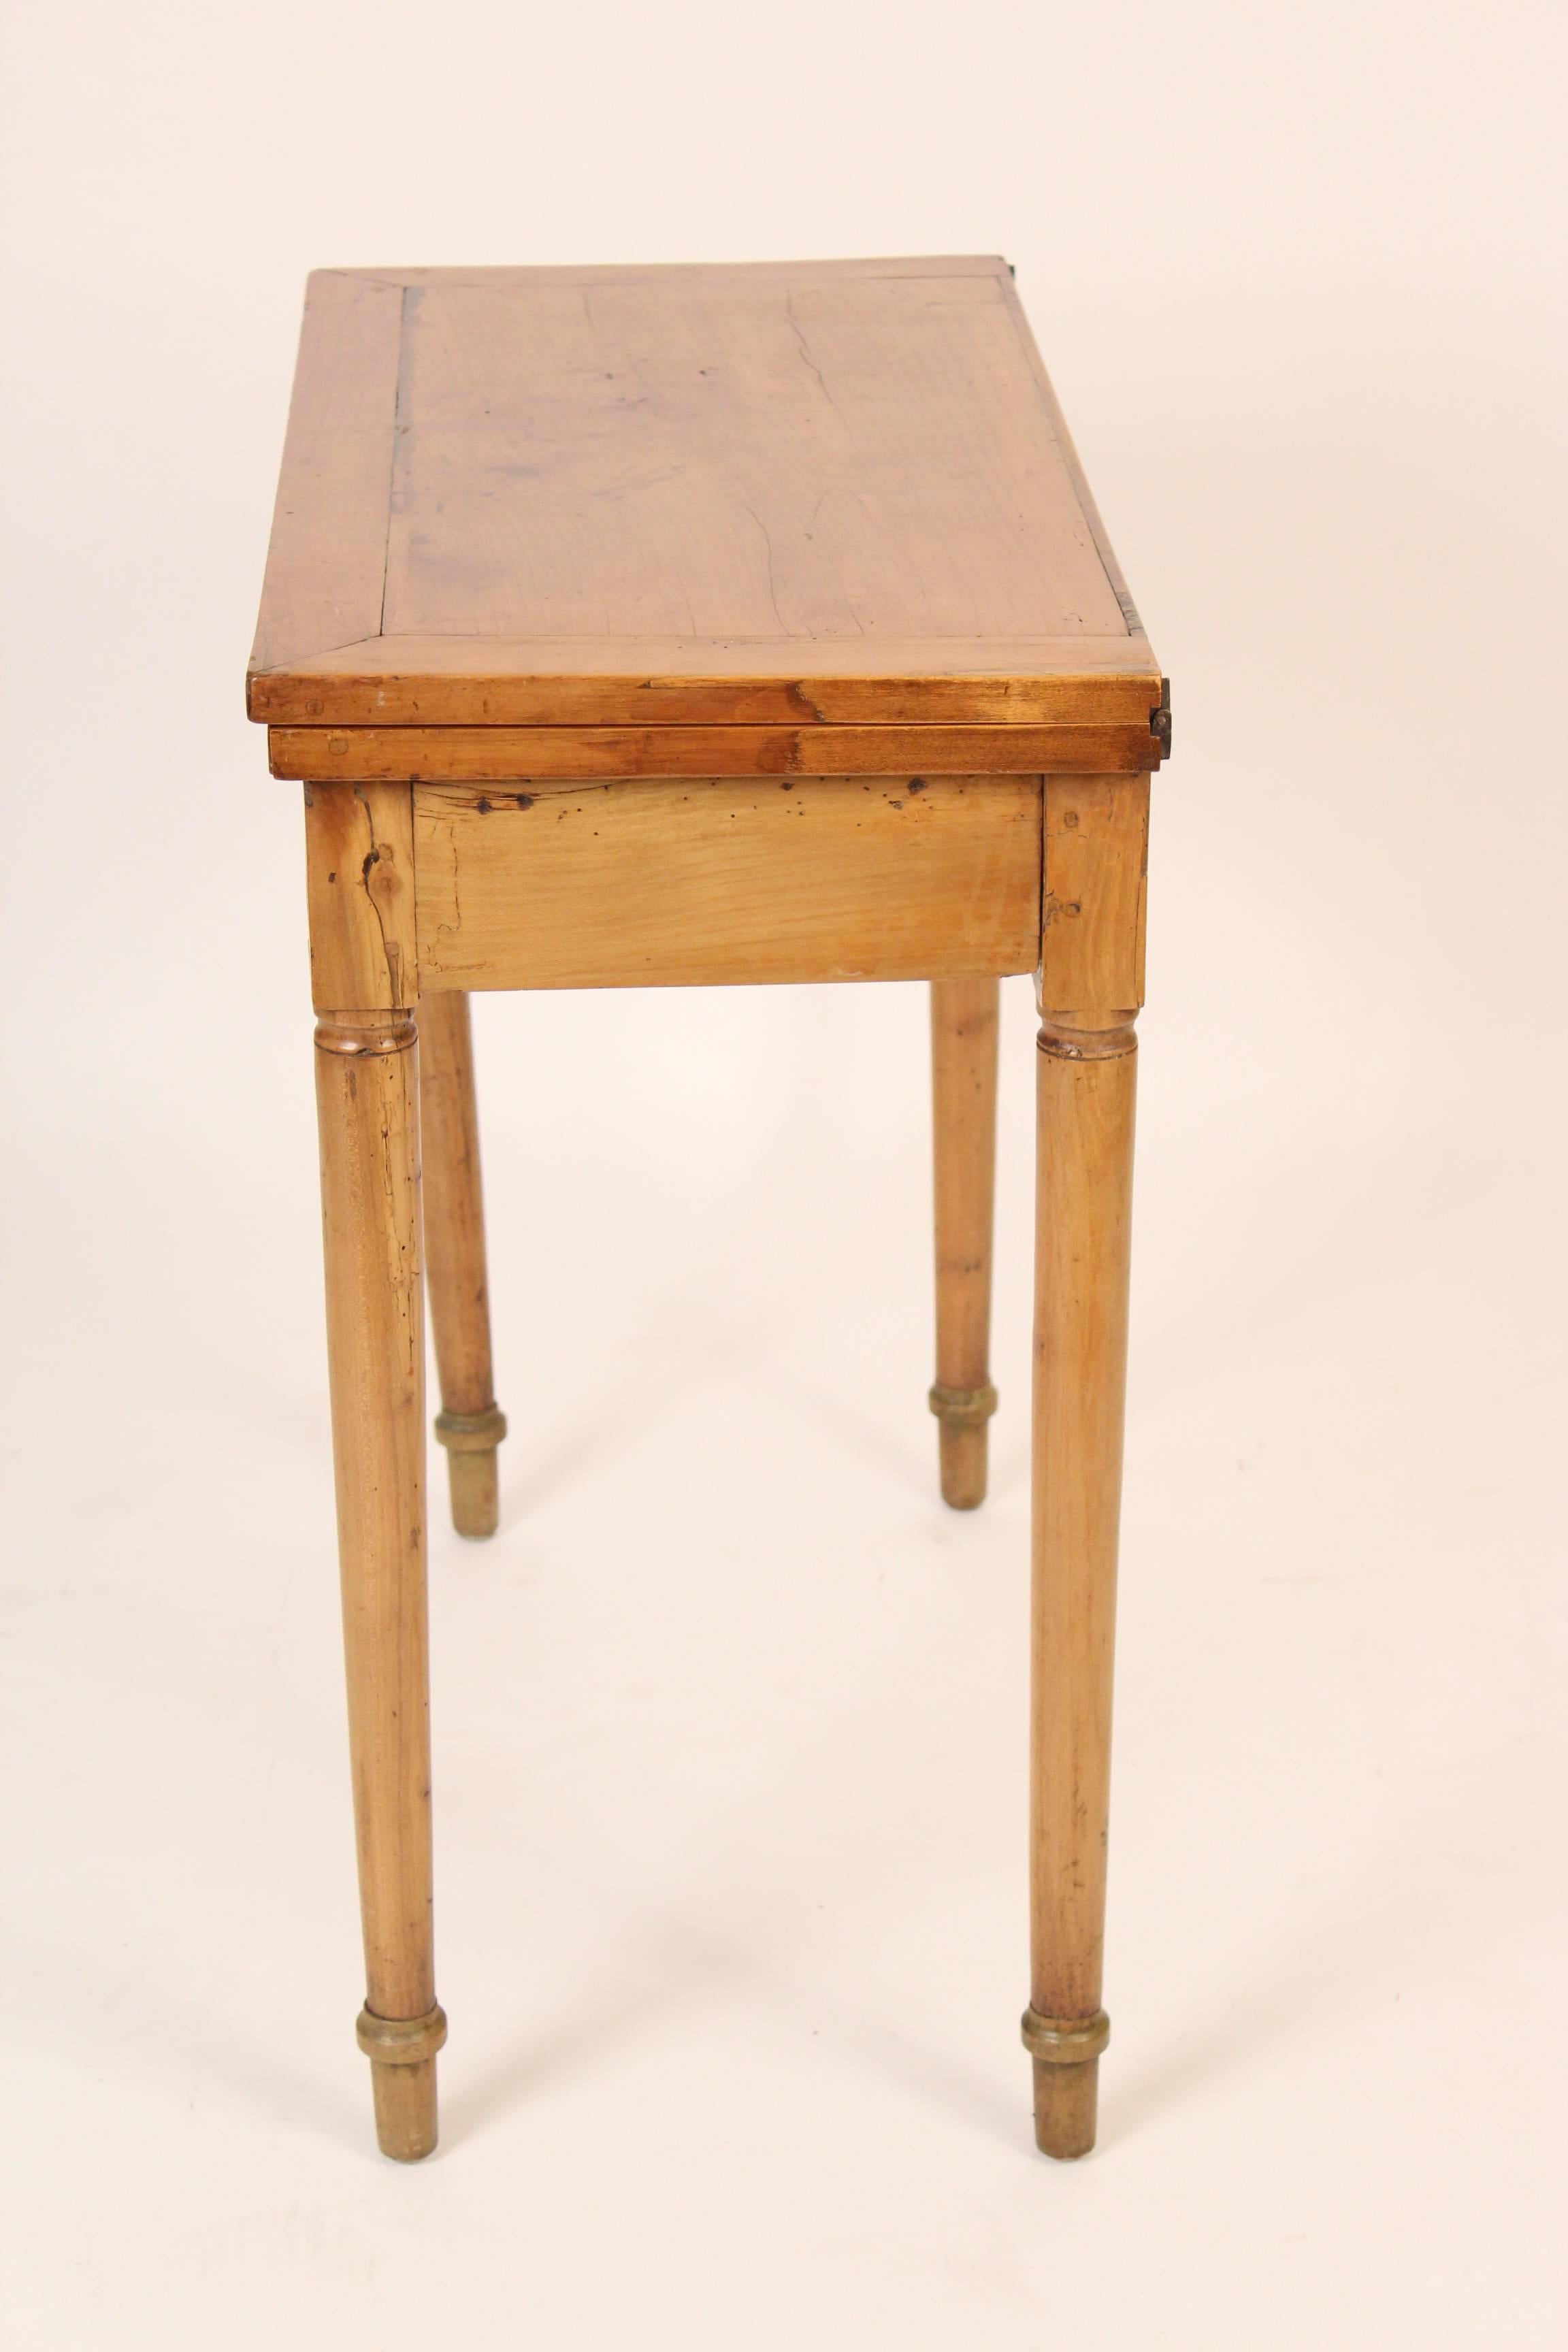 Directoire fruit wood backgammon table with leather playing surface and concertina action (both back legs pull out) early 19th century. Dimensions when closed, height 29.25